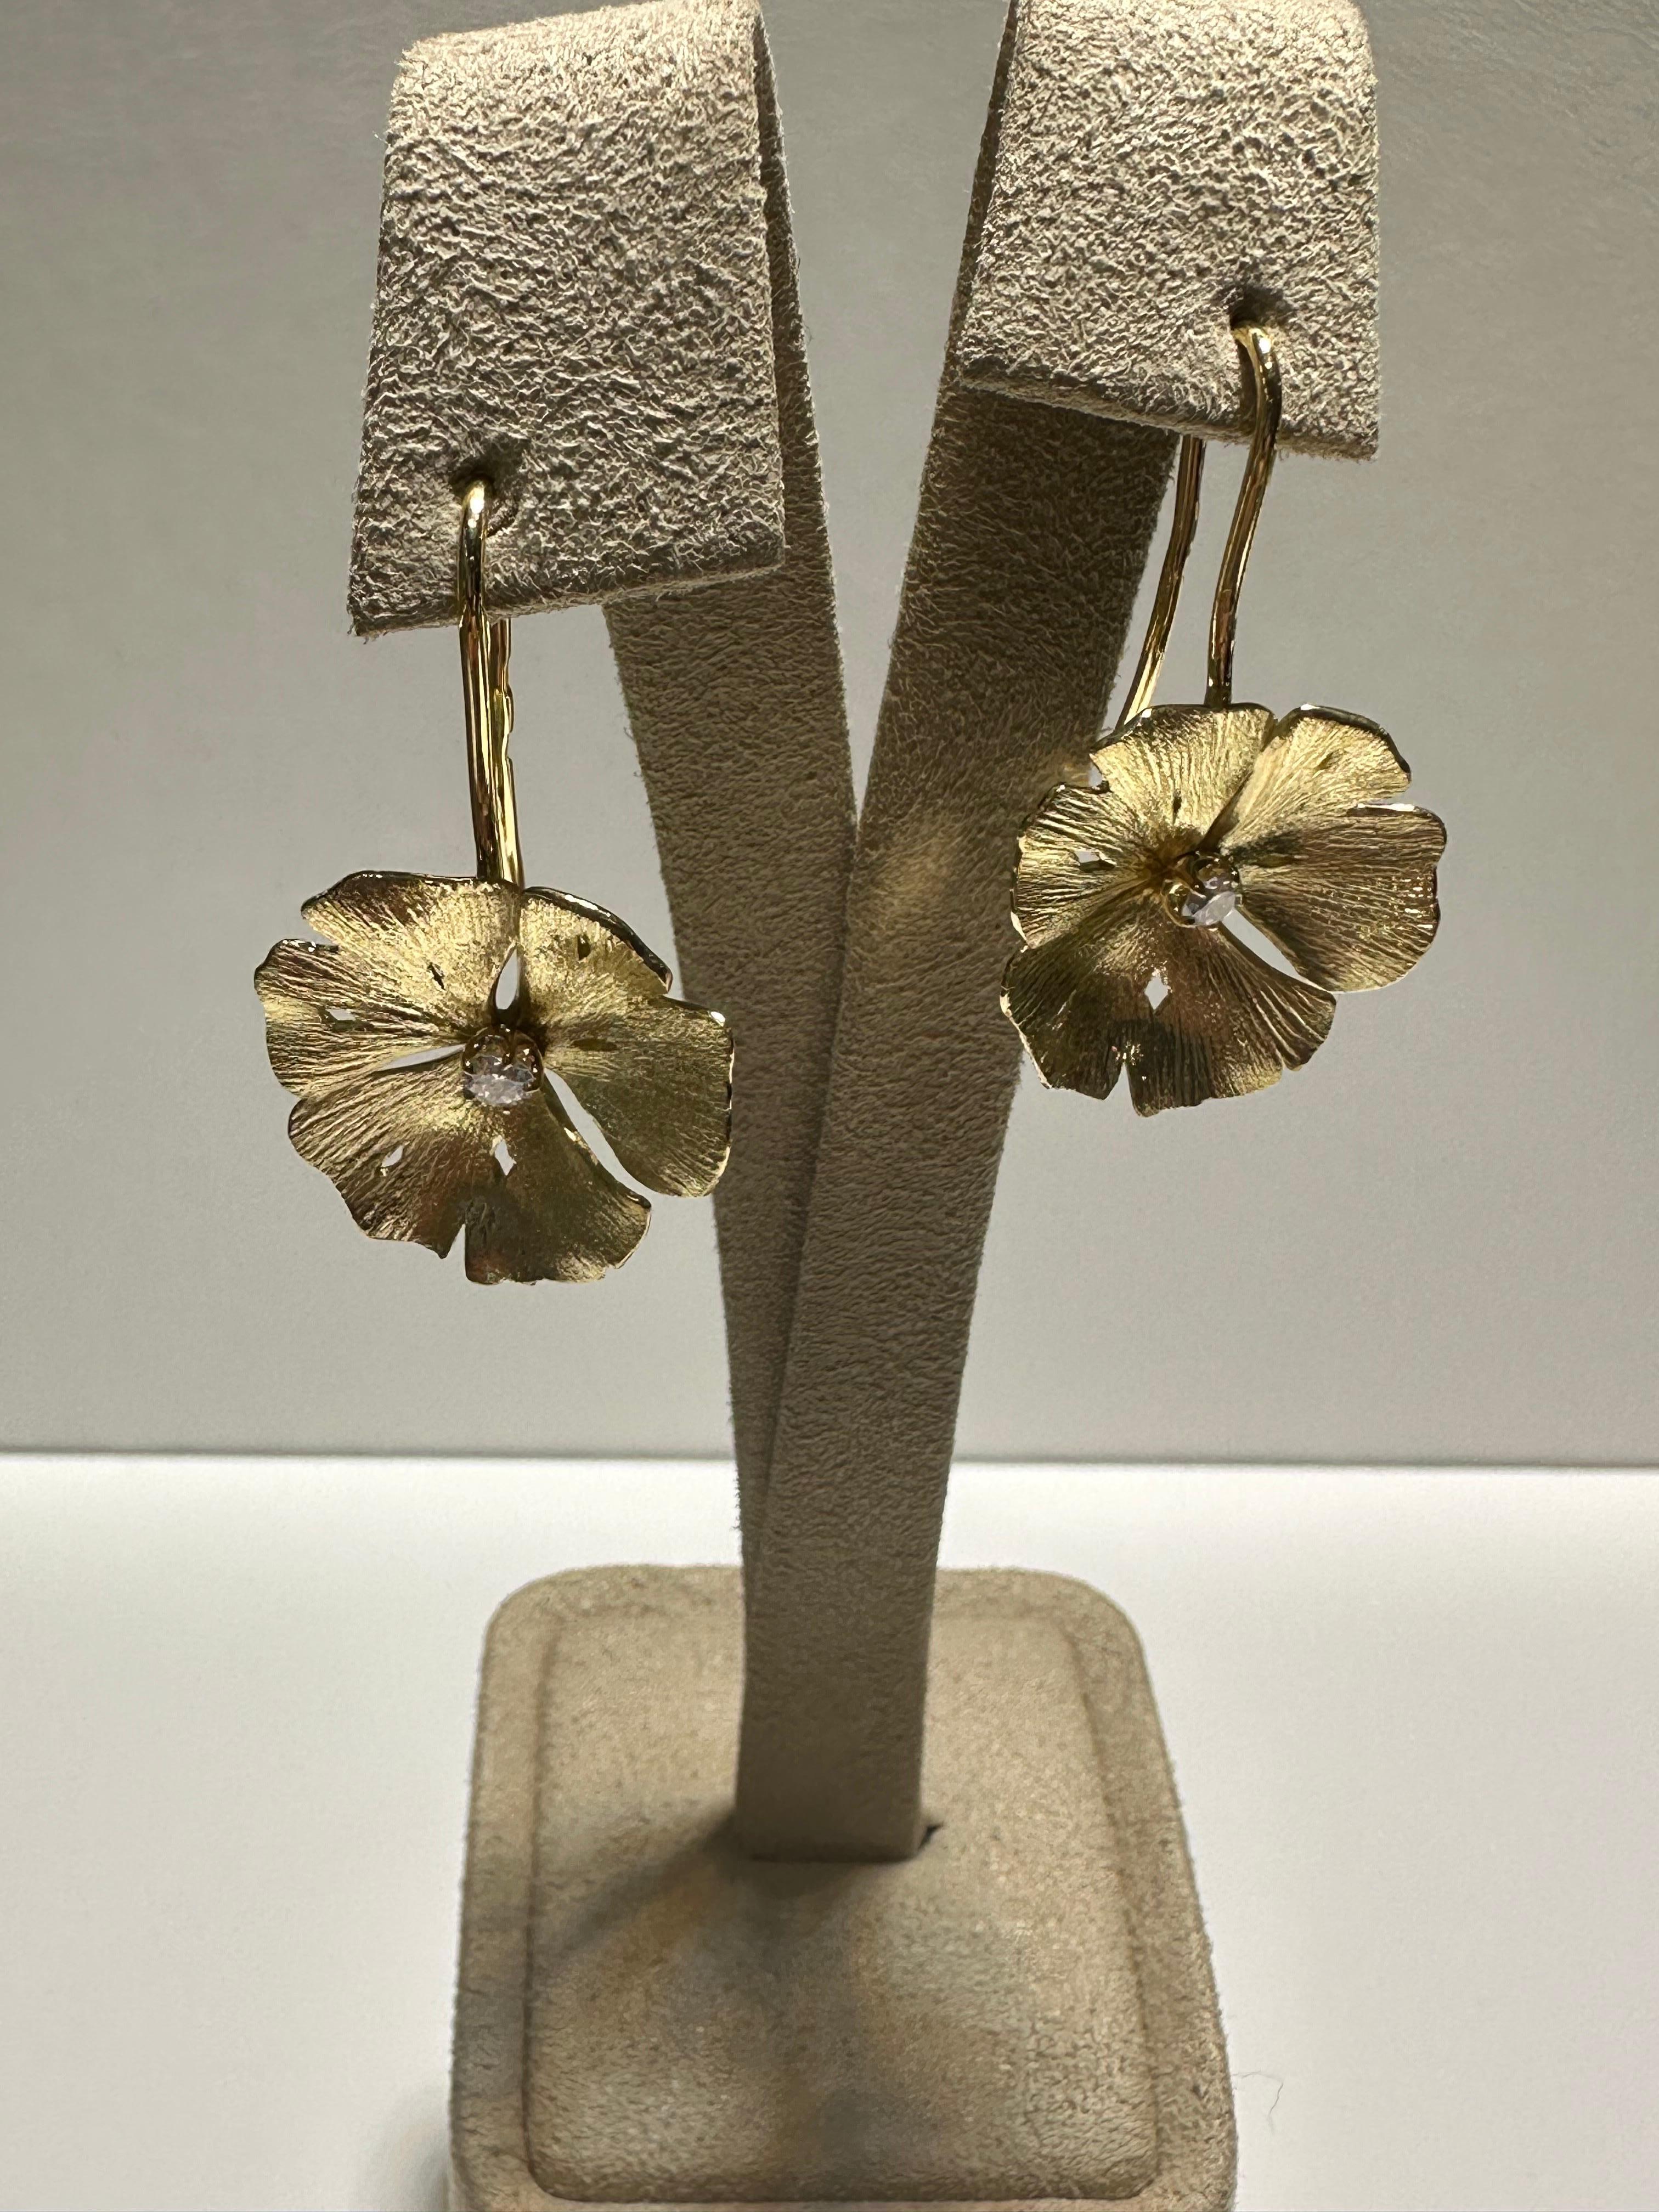 Brand new earrings made by the French jewelry house Vever. The earrings are made of 18 kt yellowgold and have 2 labgrown diamonds (0.16 ct). 

The starts in 1821 in Metz, France, when Pierre-Paul Vever opens his first silversmith & jewelry workshop.